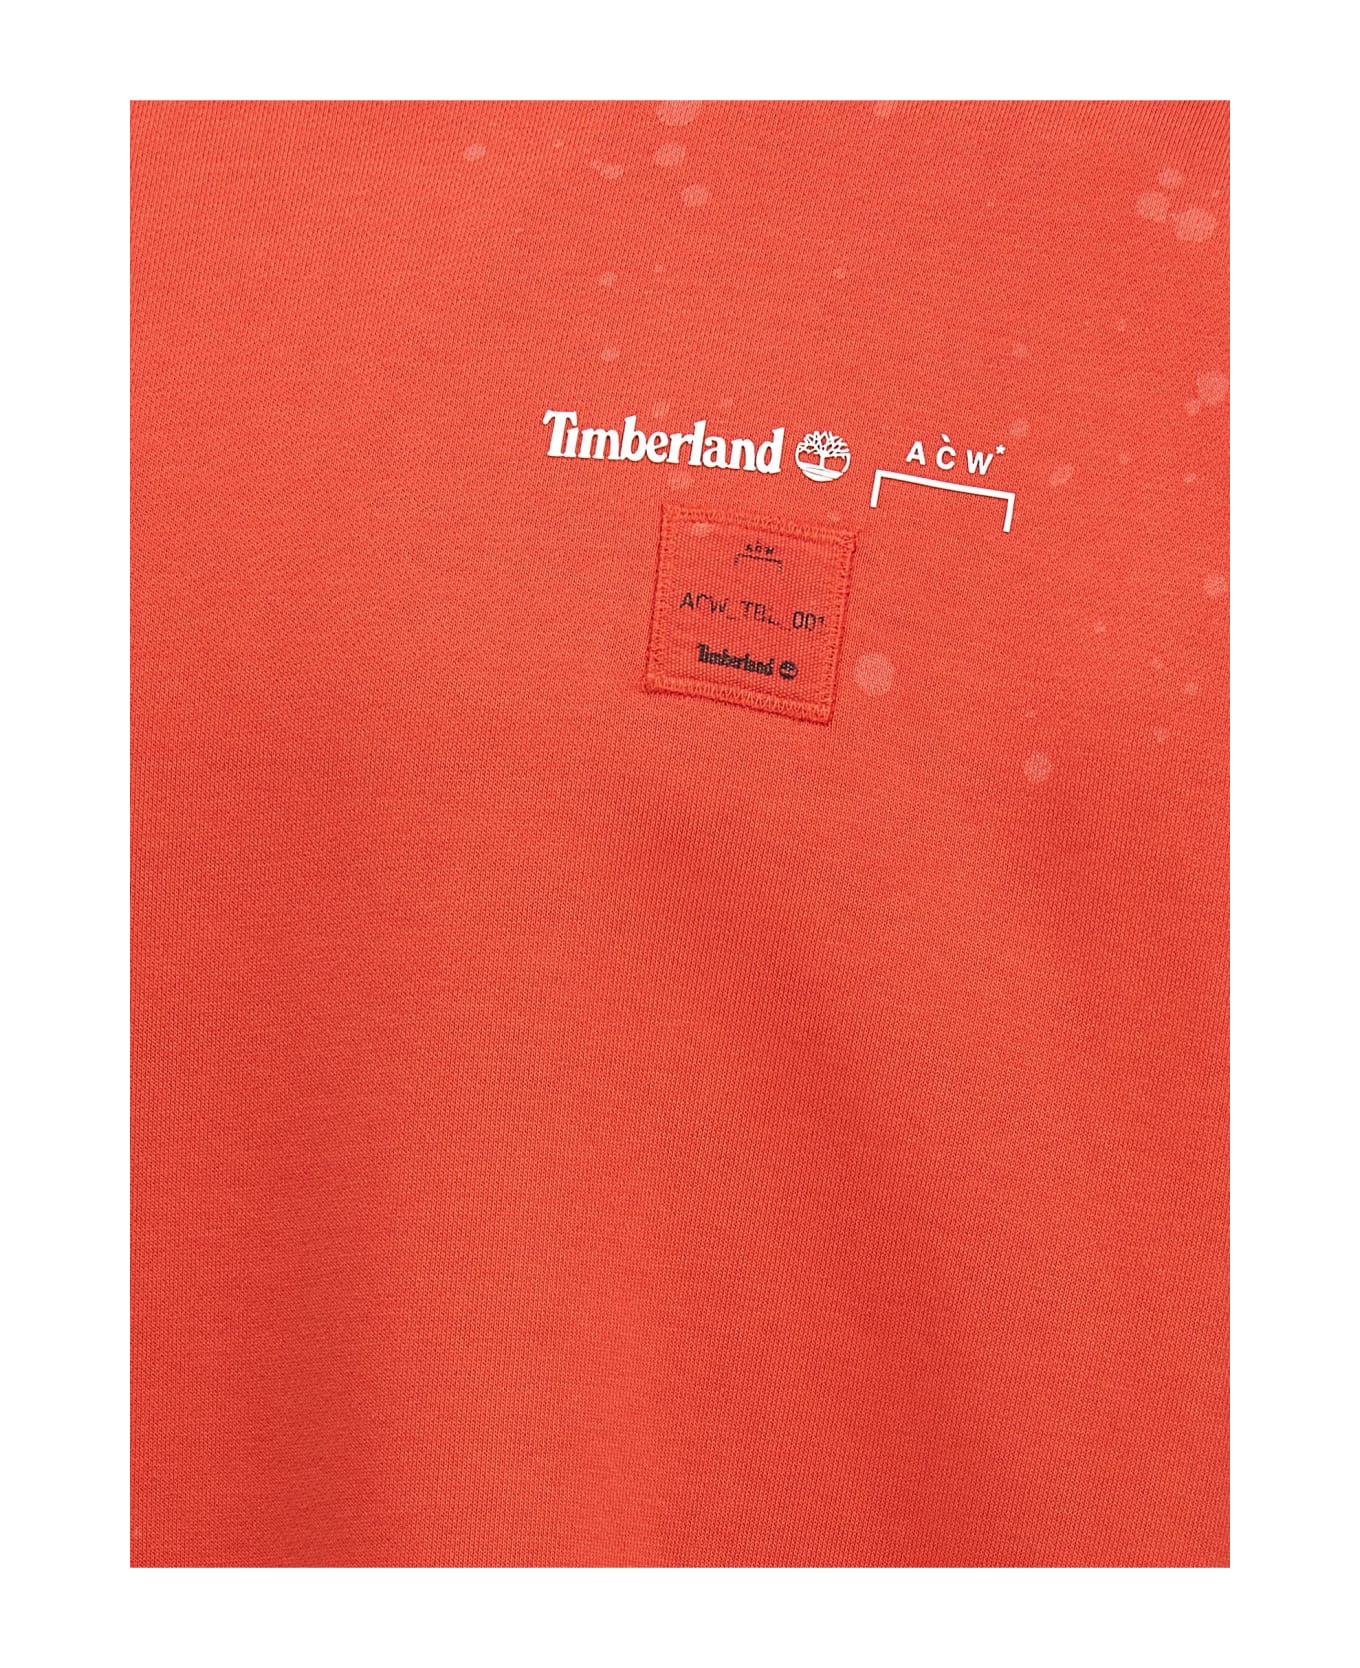 A-COLD-WALL Timberland A-cold-wall* Capsule Sweatshirt - Red